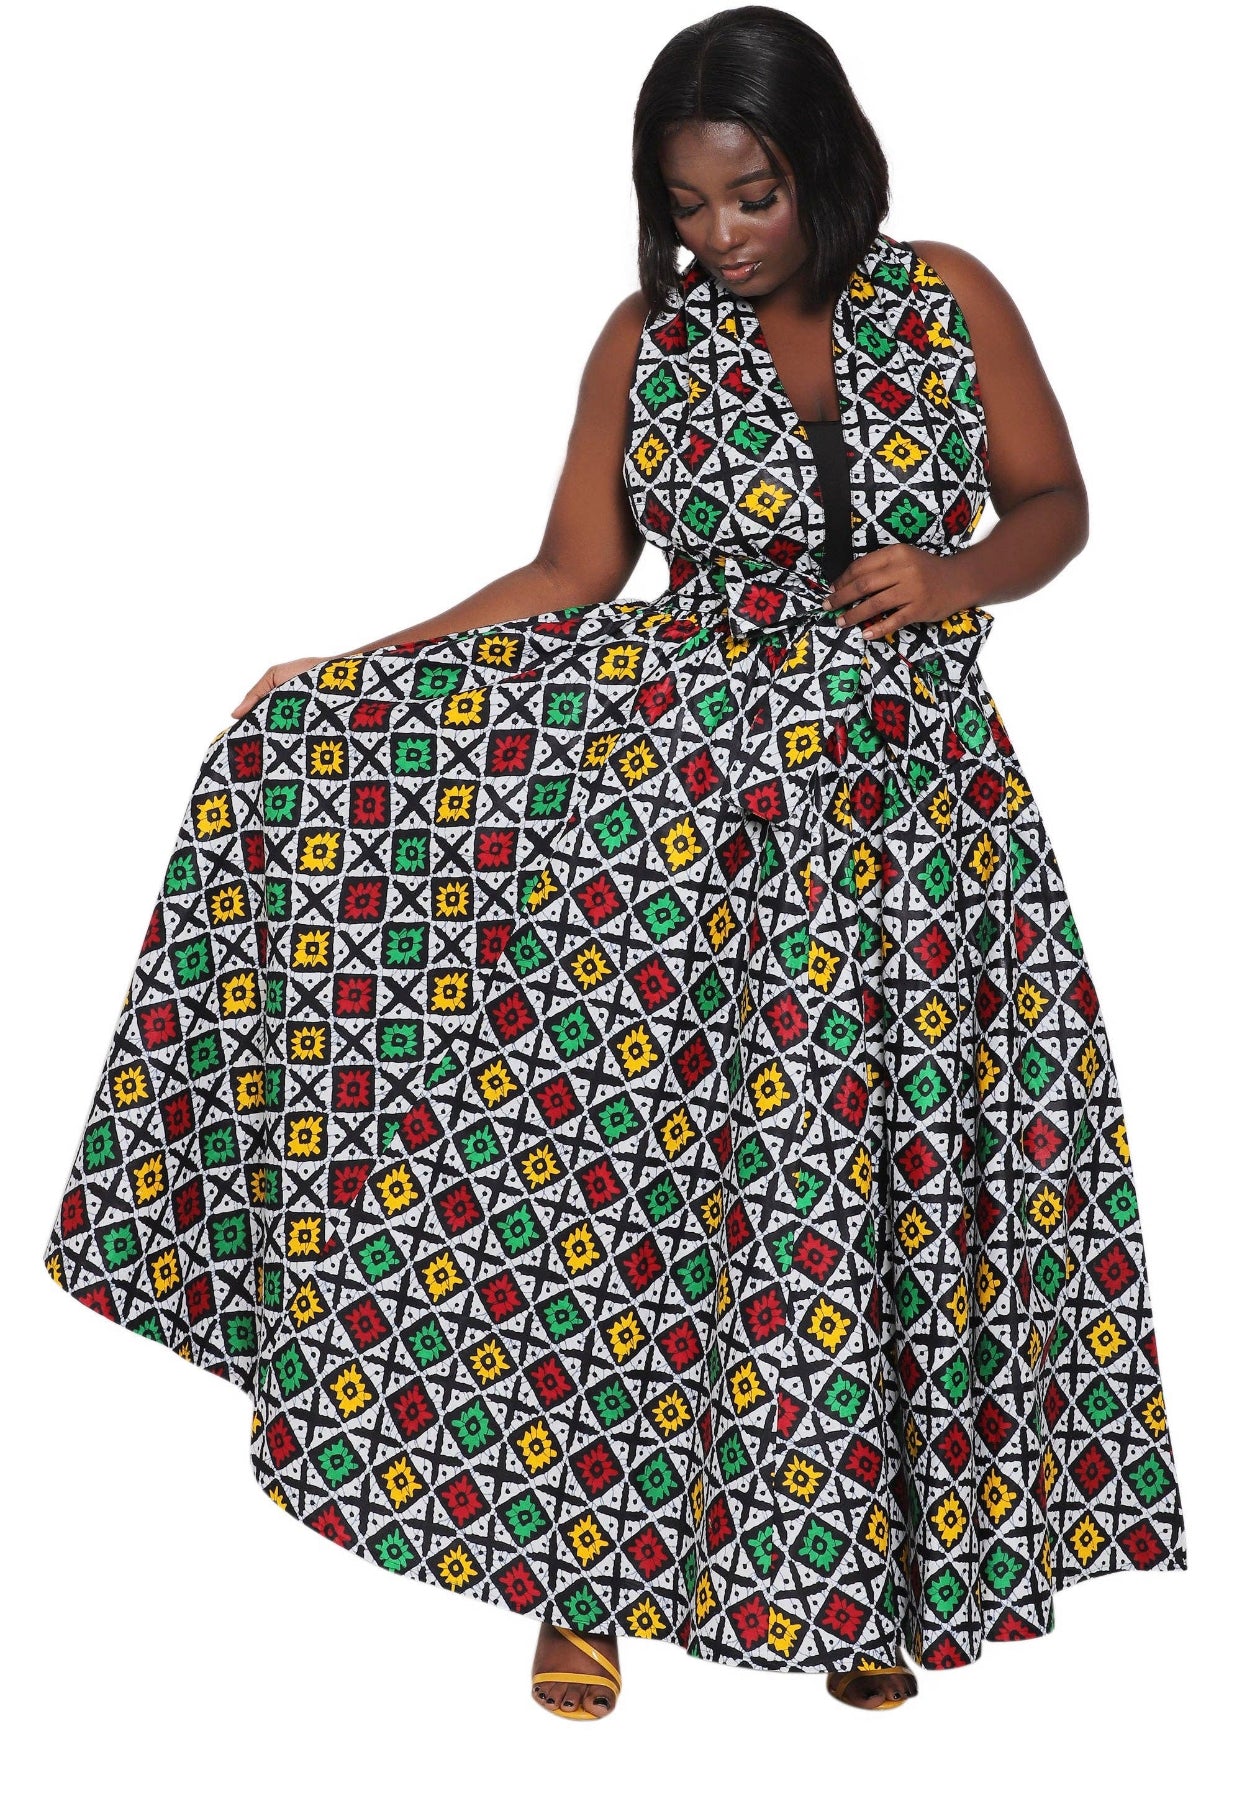 Hand Made African Print Full Skirt with Coordinating Head Wrap and Facemask (Red, Green, Yellow Squares)